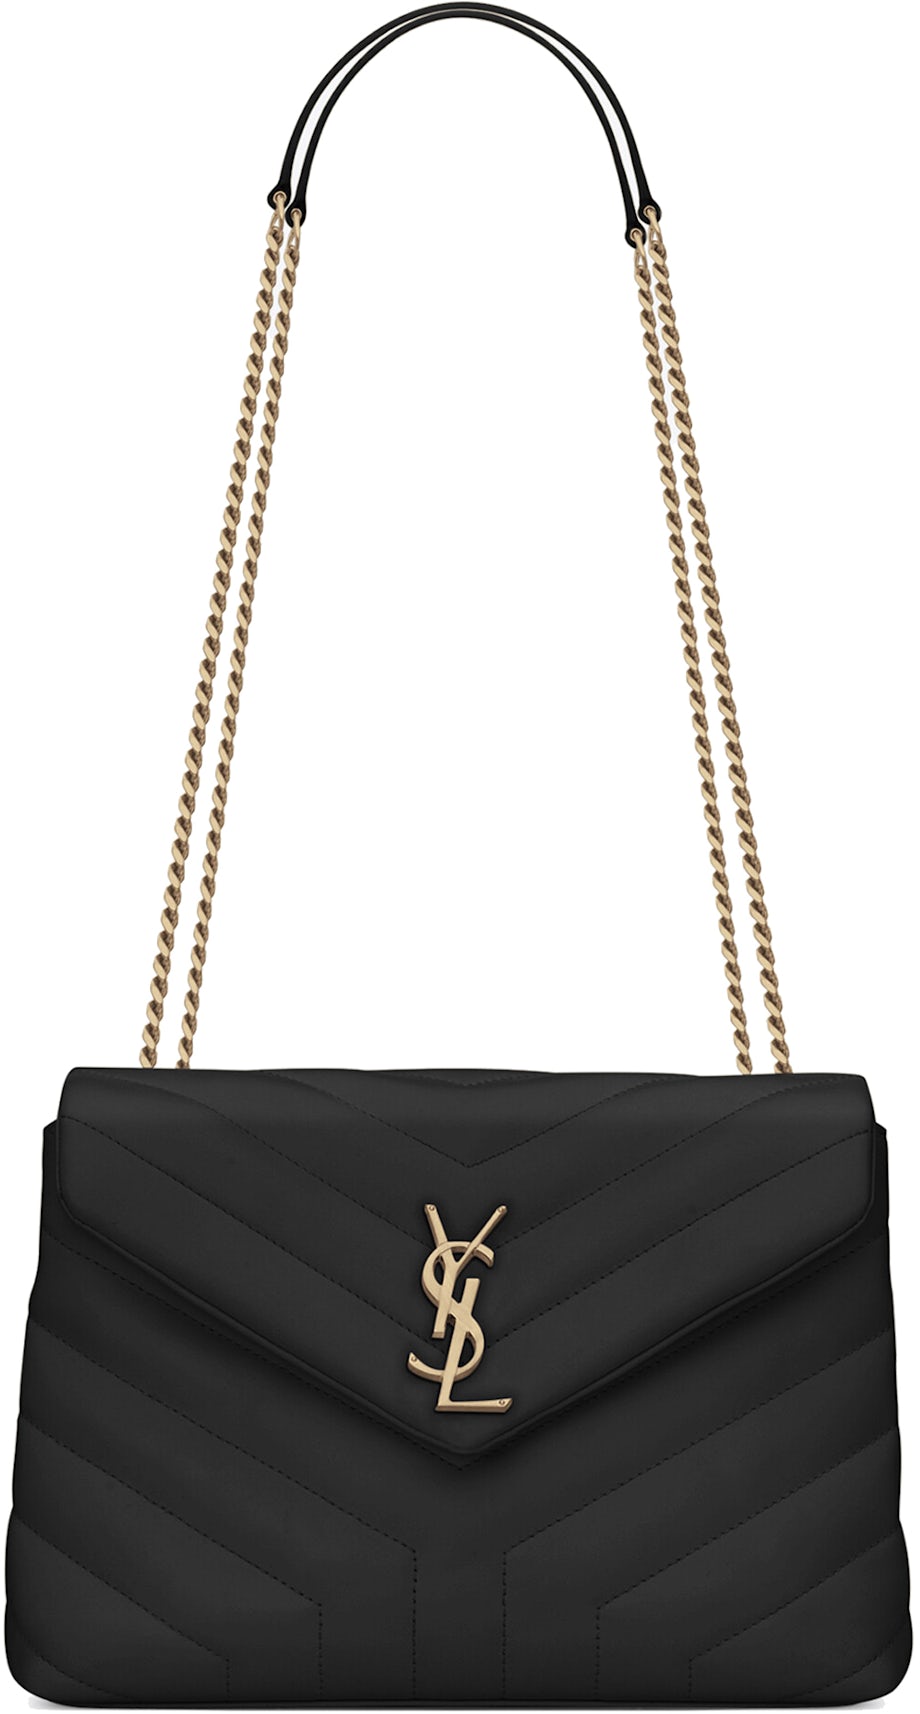 Saint Laurent Black Quilted Leather Small Loulou Bag ASC2086